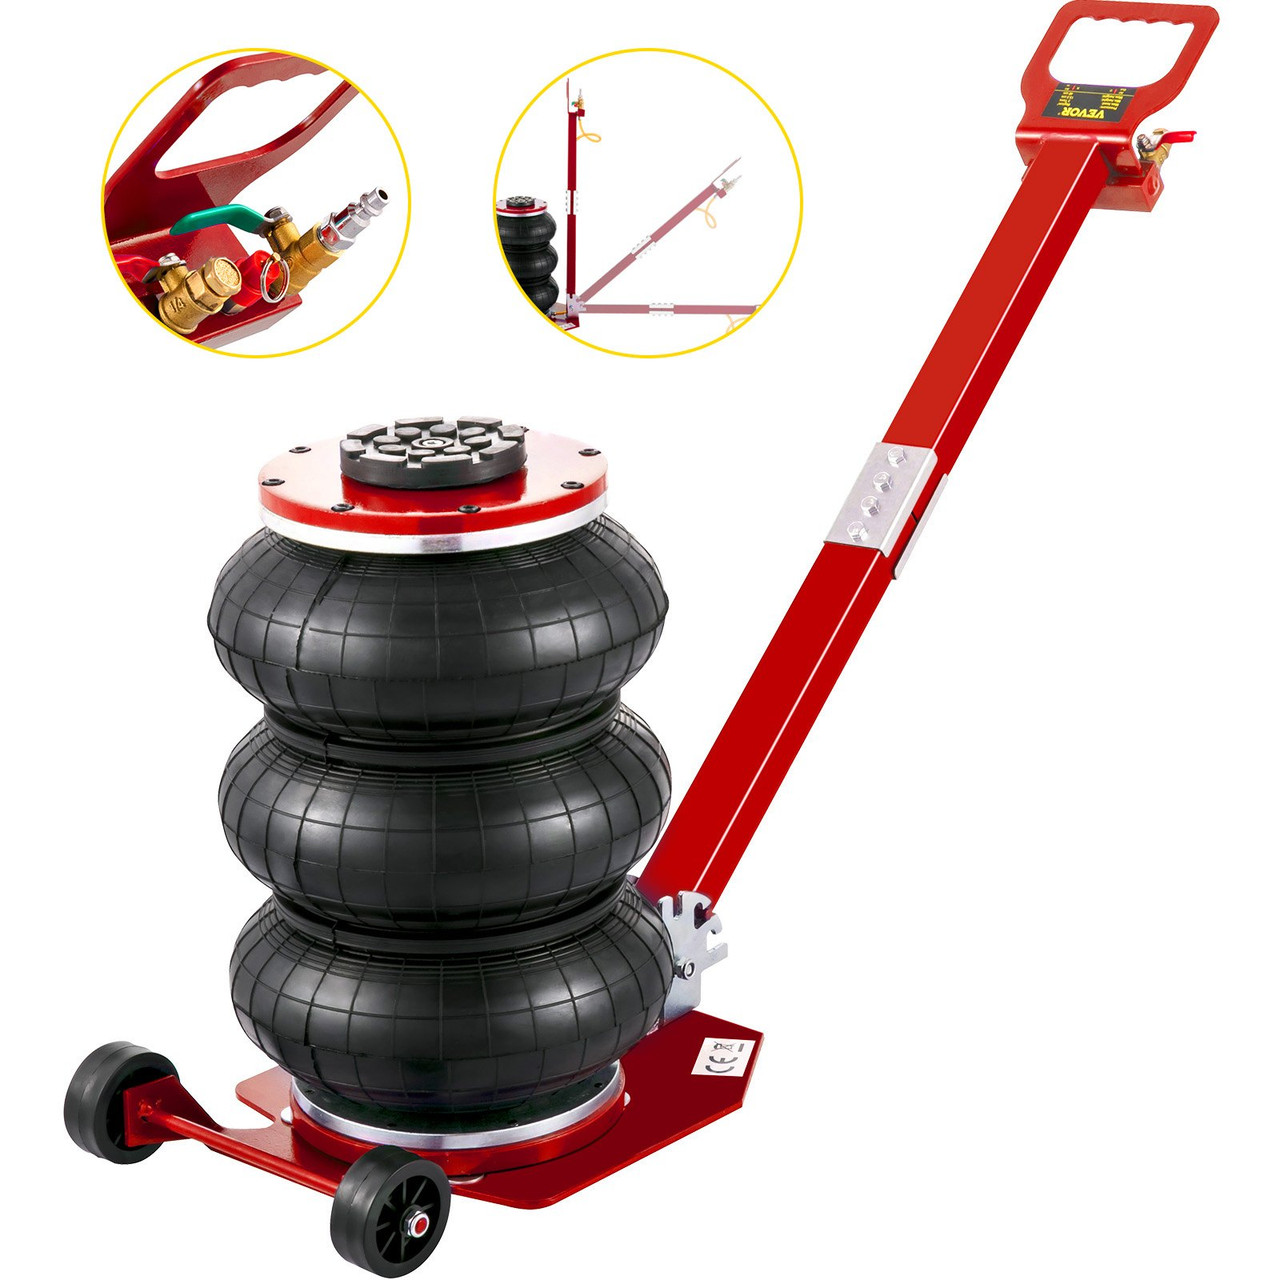 Bag Air Jack 6600lbs Capacity, Folding Rod Fast Lifting, Pneumatic Jack Quick Lift 3T, Pneumatic Car Jack with Two Wheels for Quick Car Lifting Jack